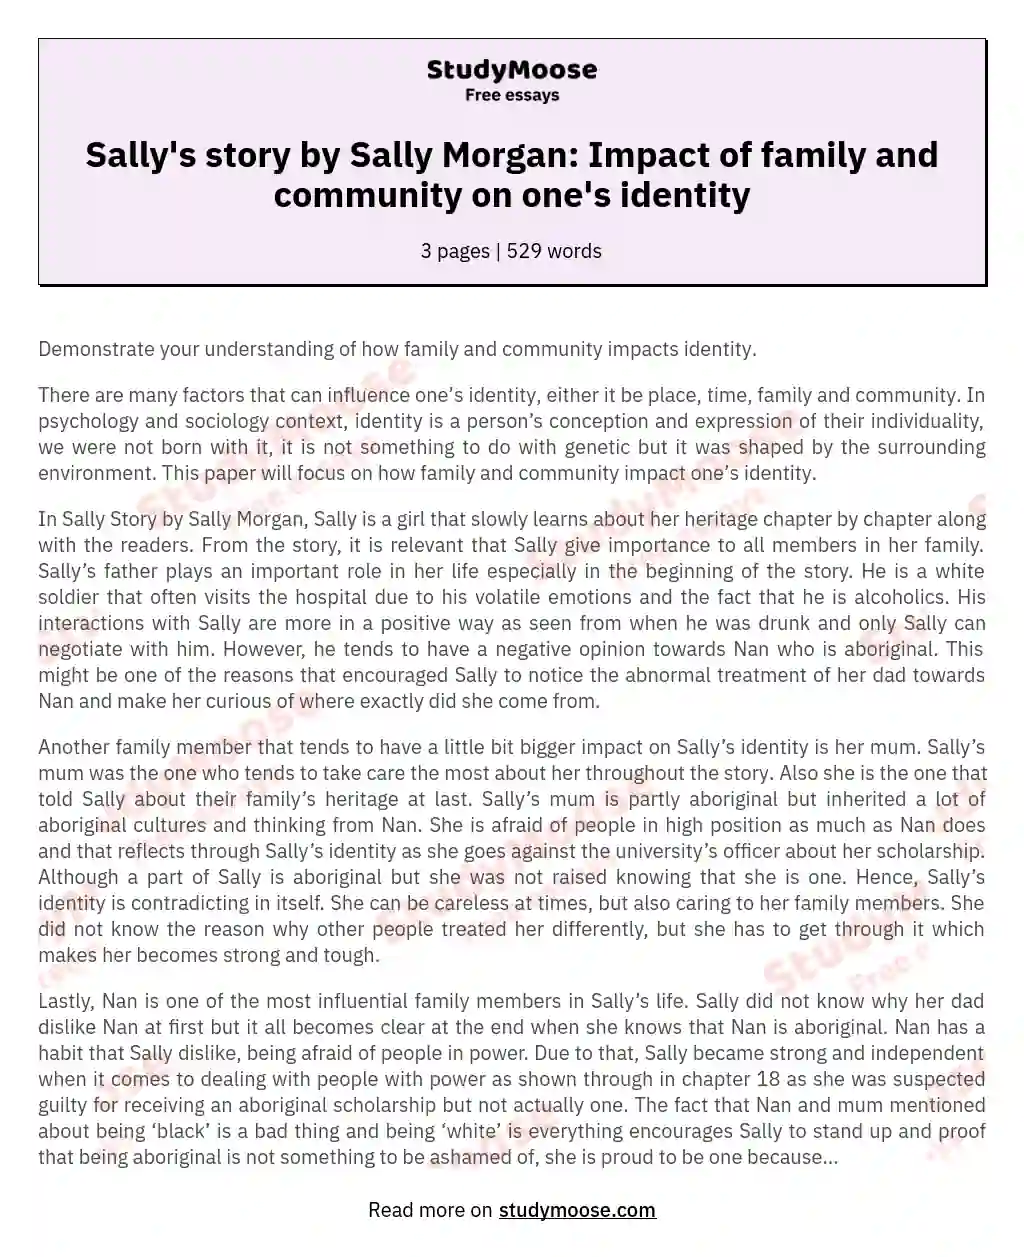 Sally's story by Sally Morgan: Impact of family and community on one's identity essay